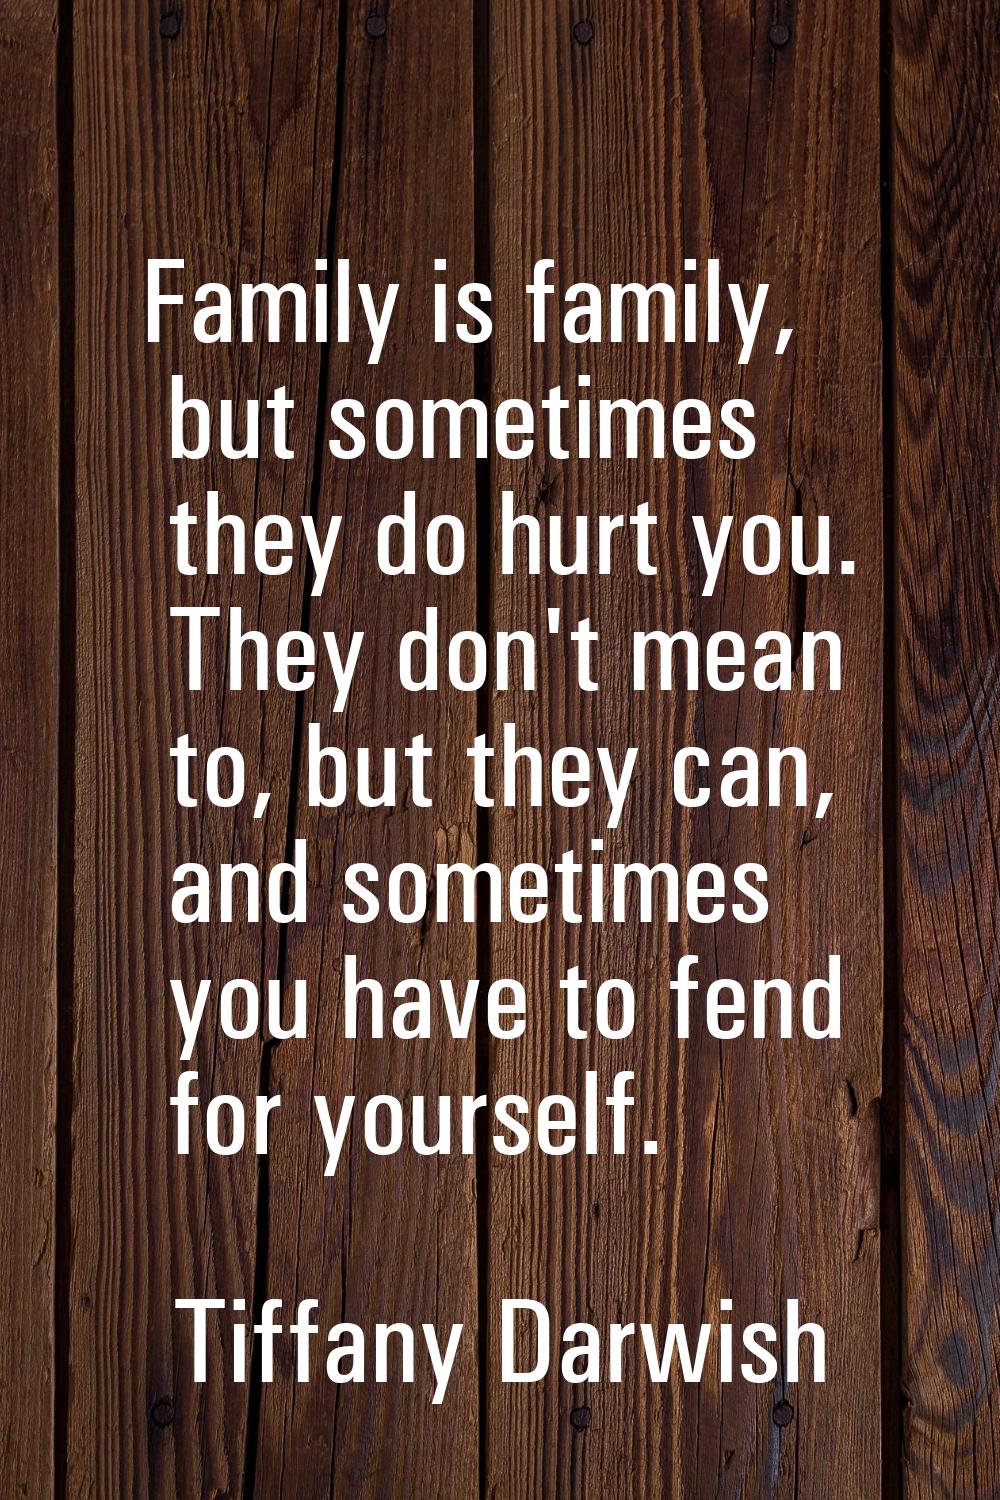 Family is family, but sometimes they do hurt you. They don't mean to, but they can, and sometimes y